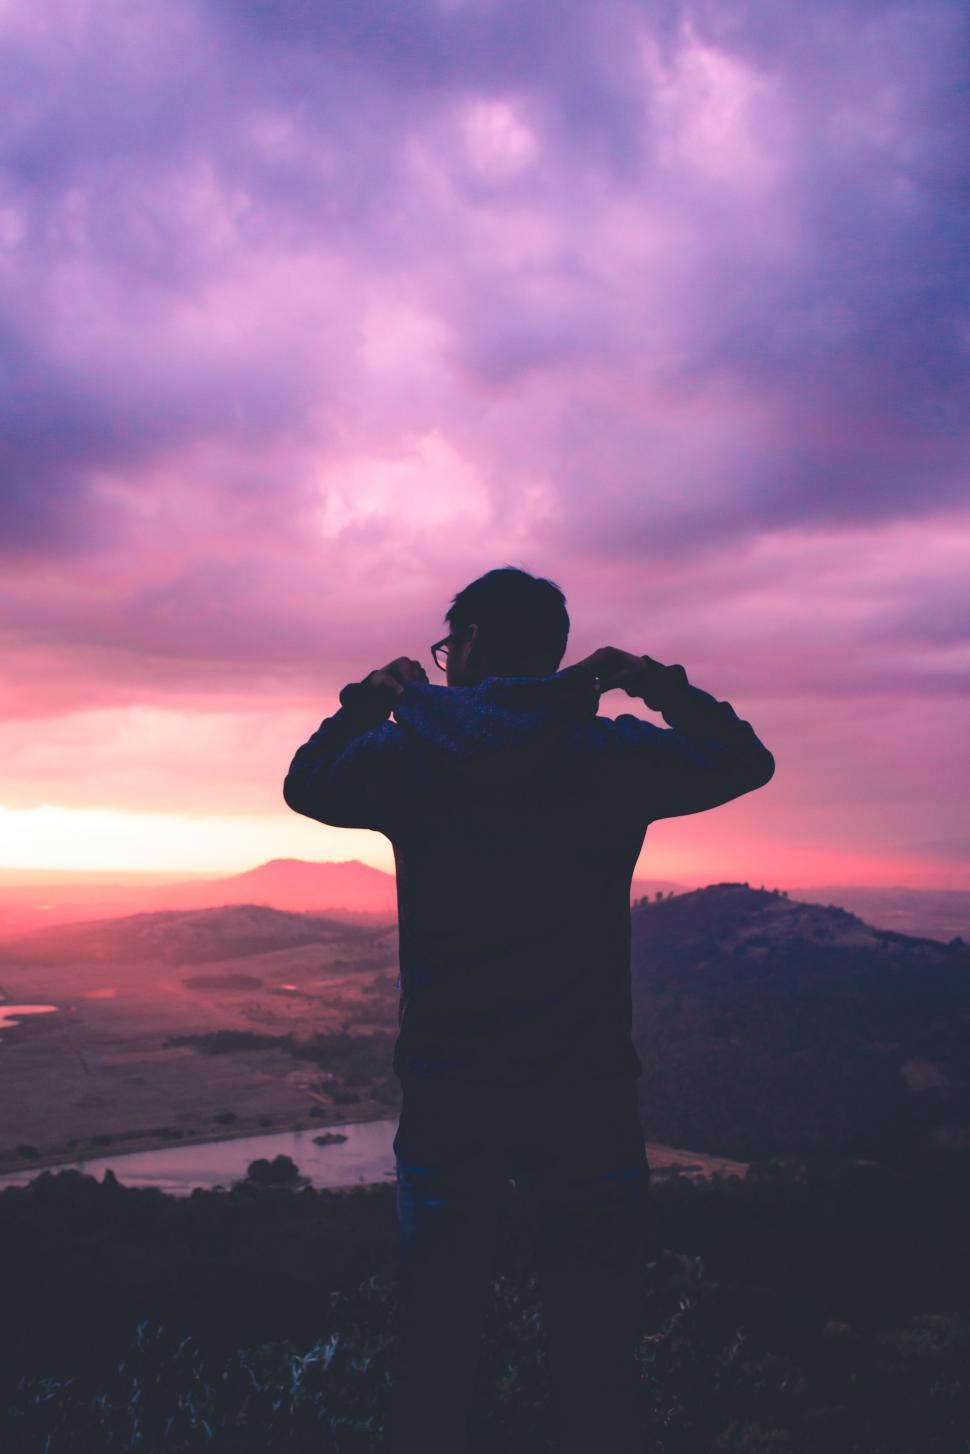 Free Image of Man Standing on Top of Hill Under Purple Sky 